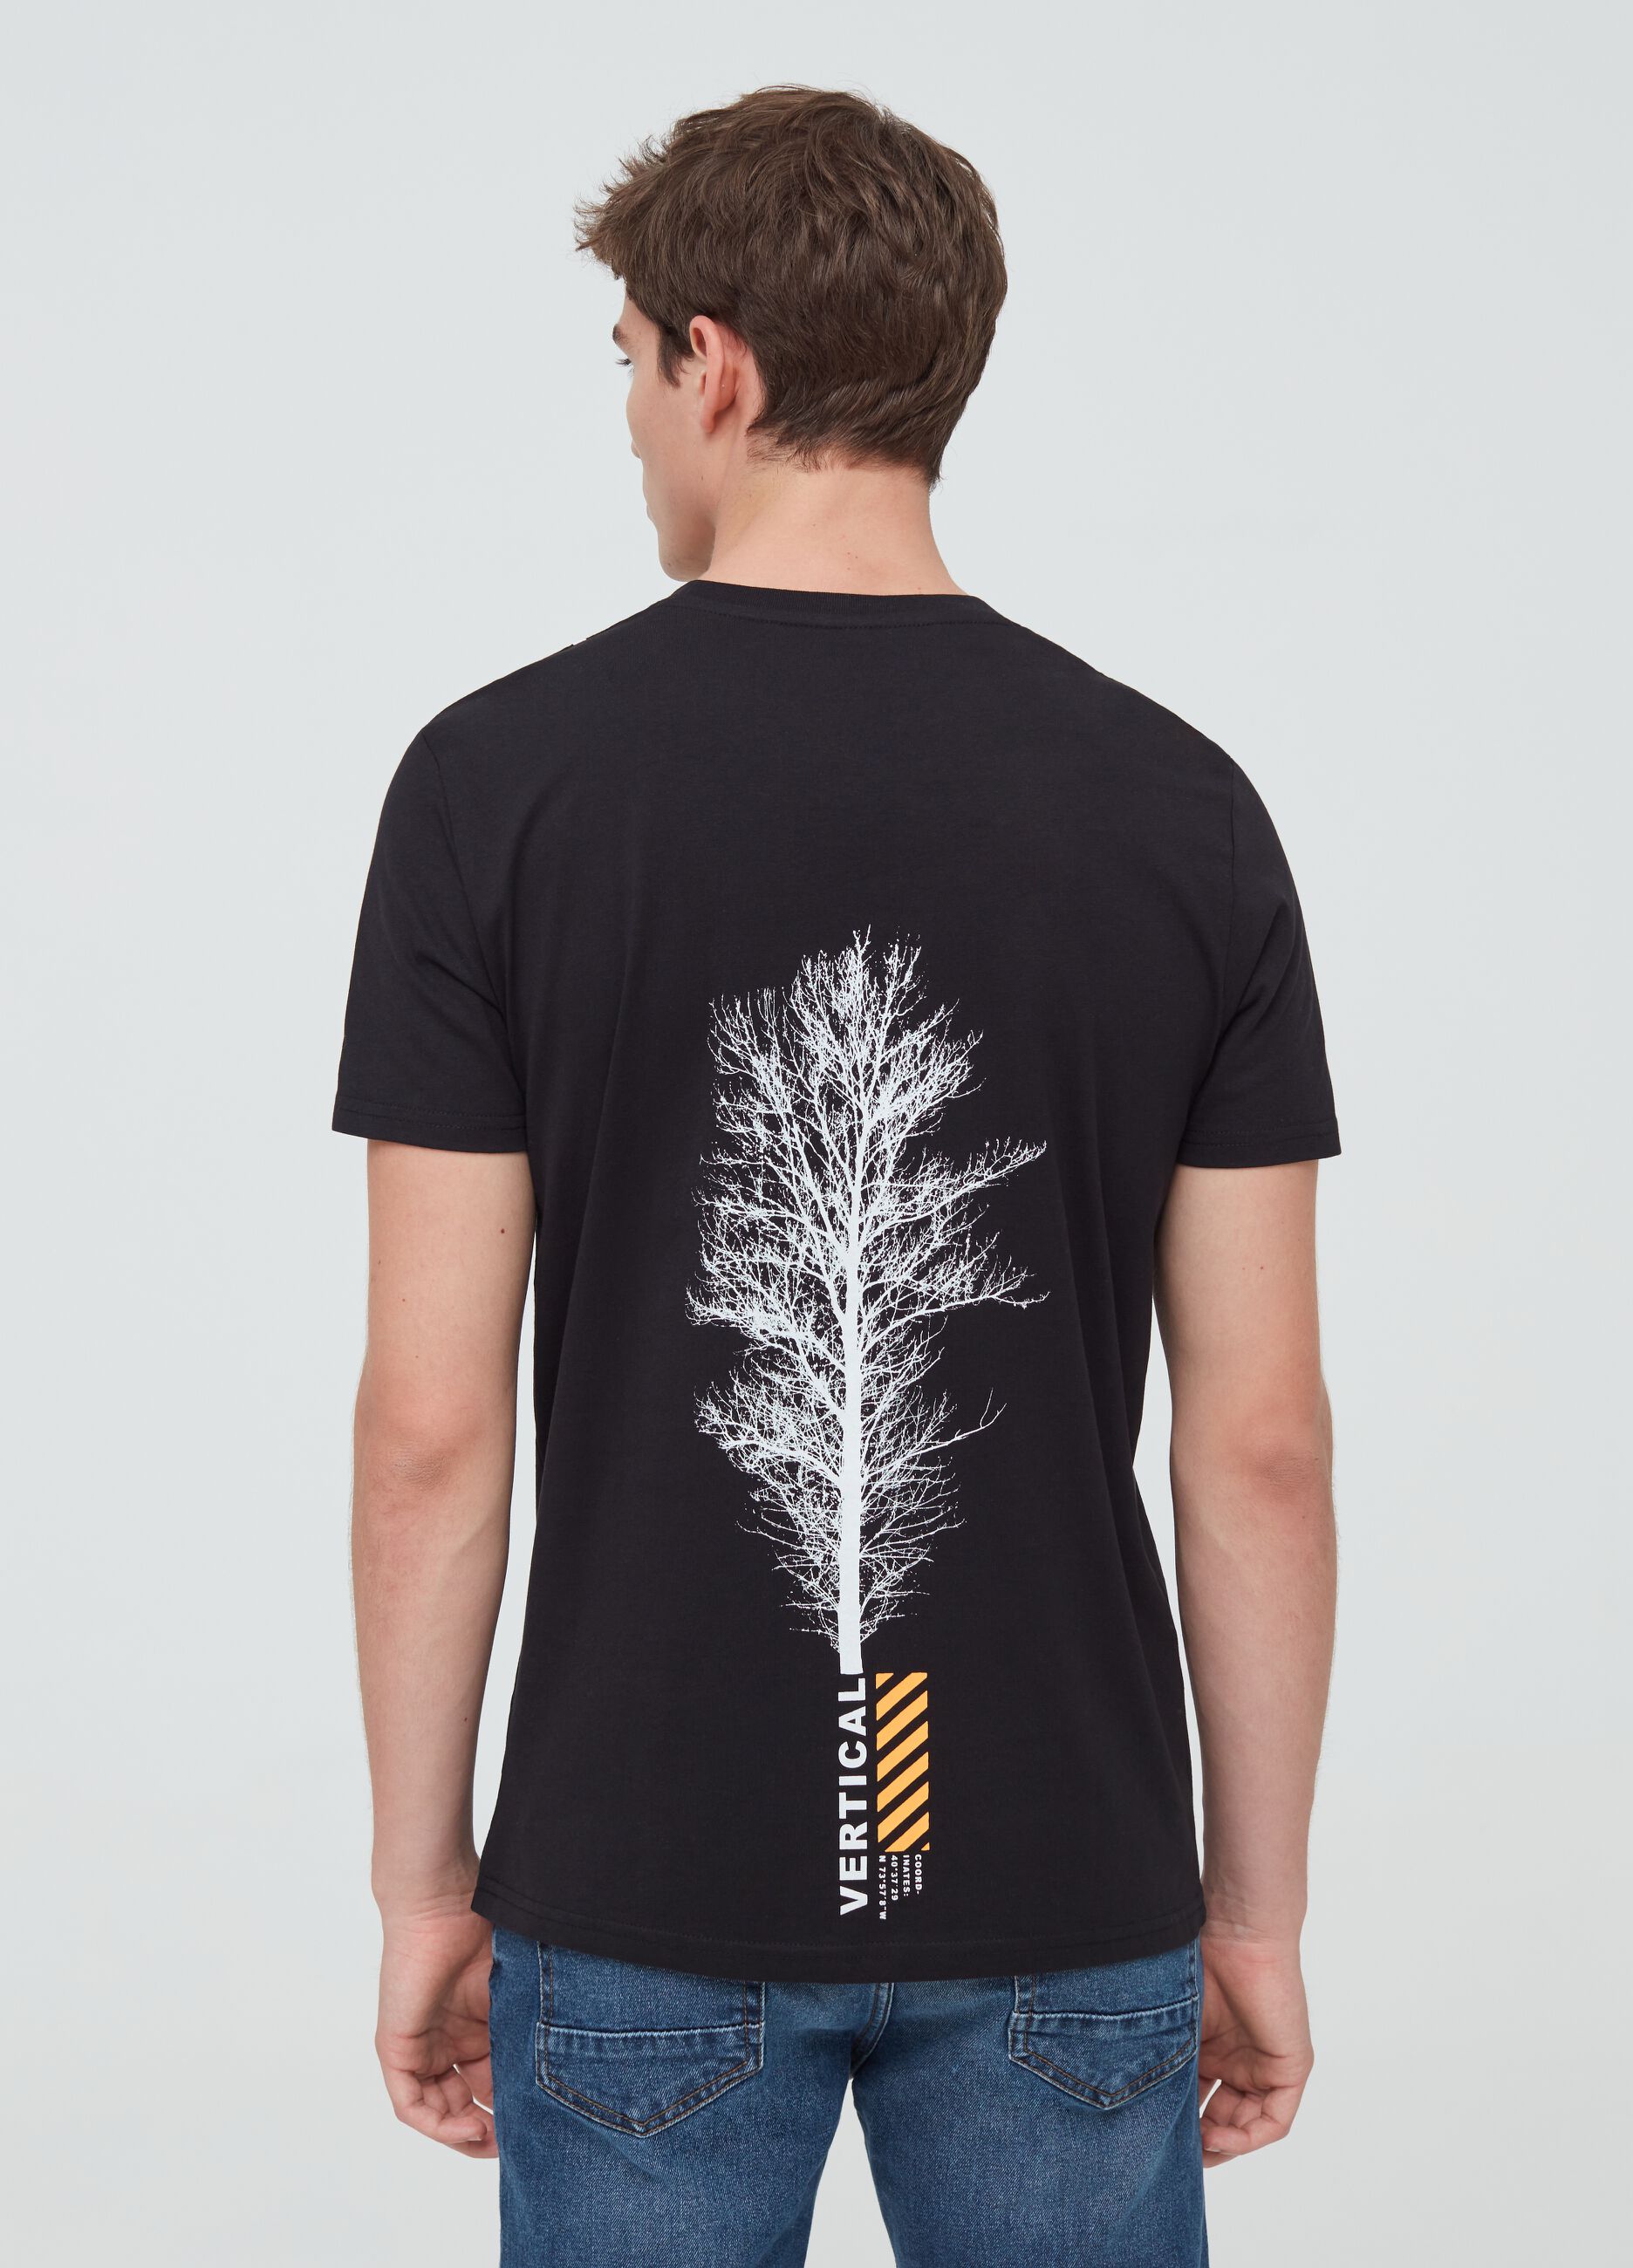 100% cotton T-shirt with tree print